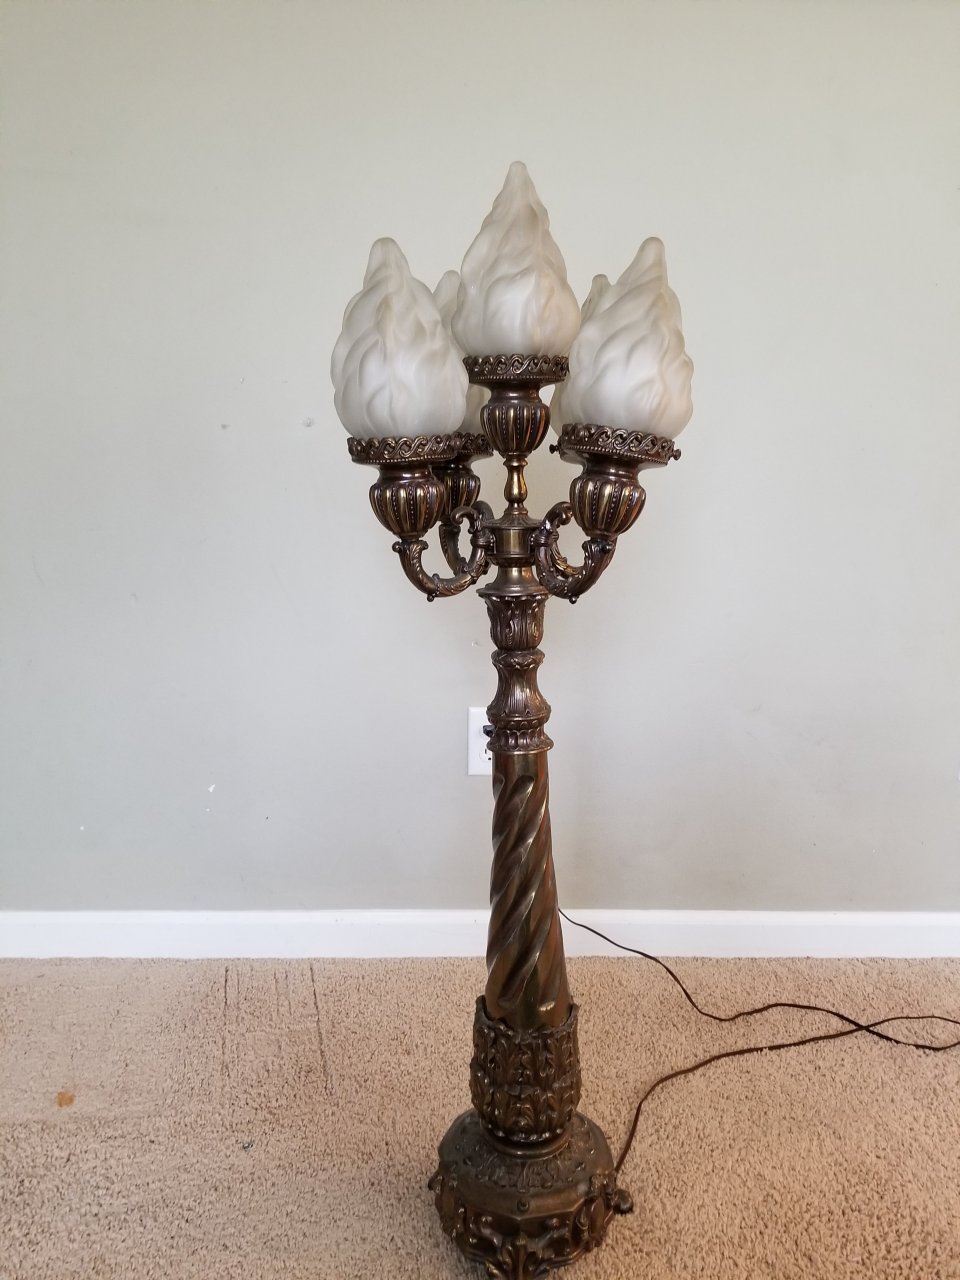 Antique Hotel Brass Floor Lamp. | My Antique Furniture Collection